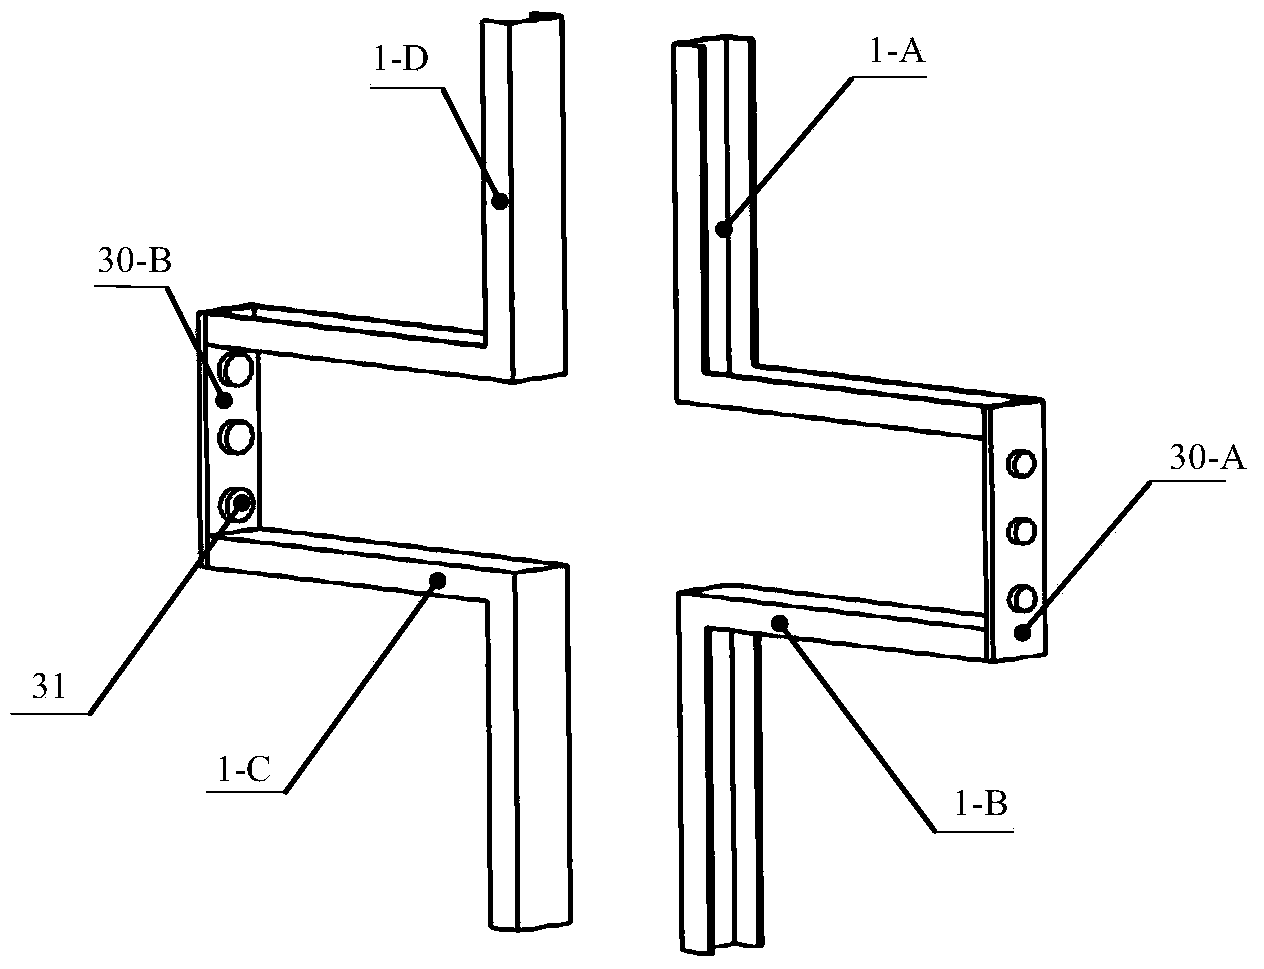 High-temperature biaxial tension device